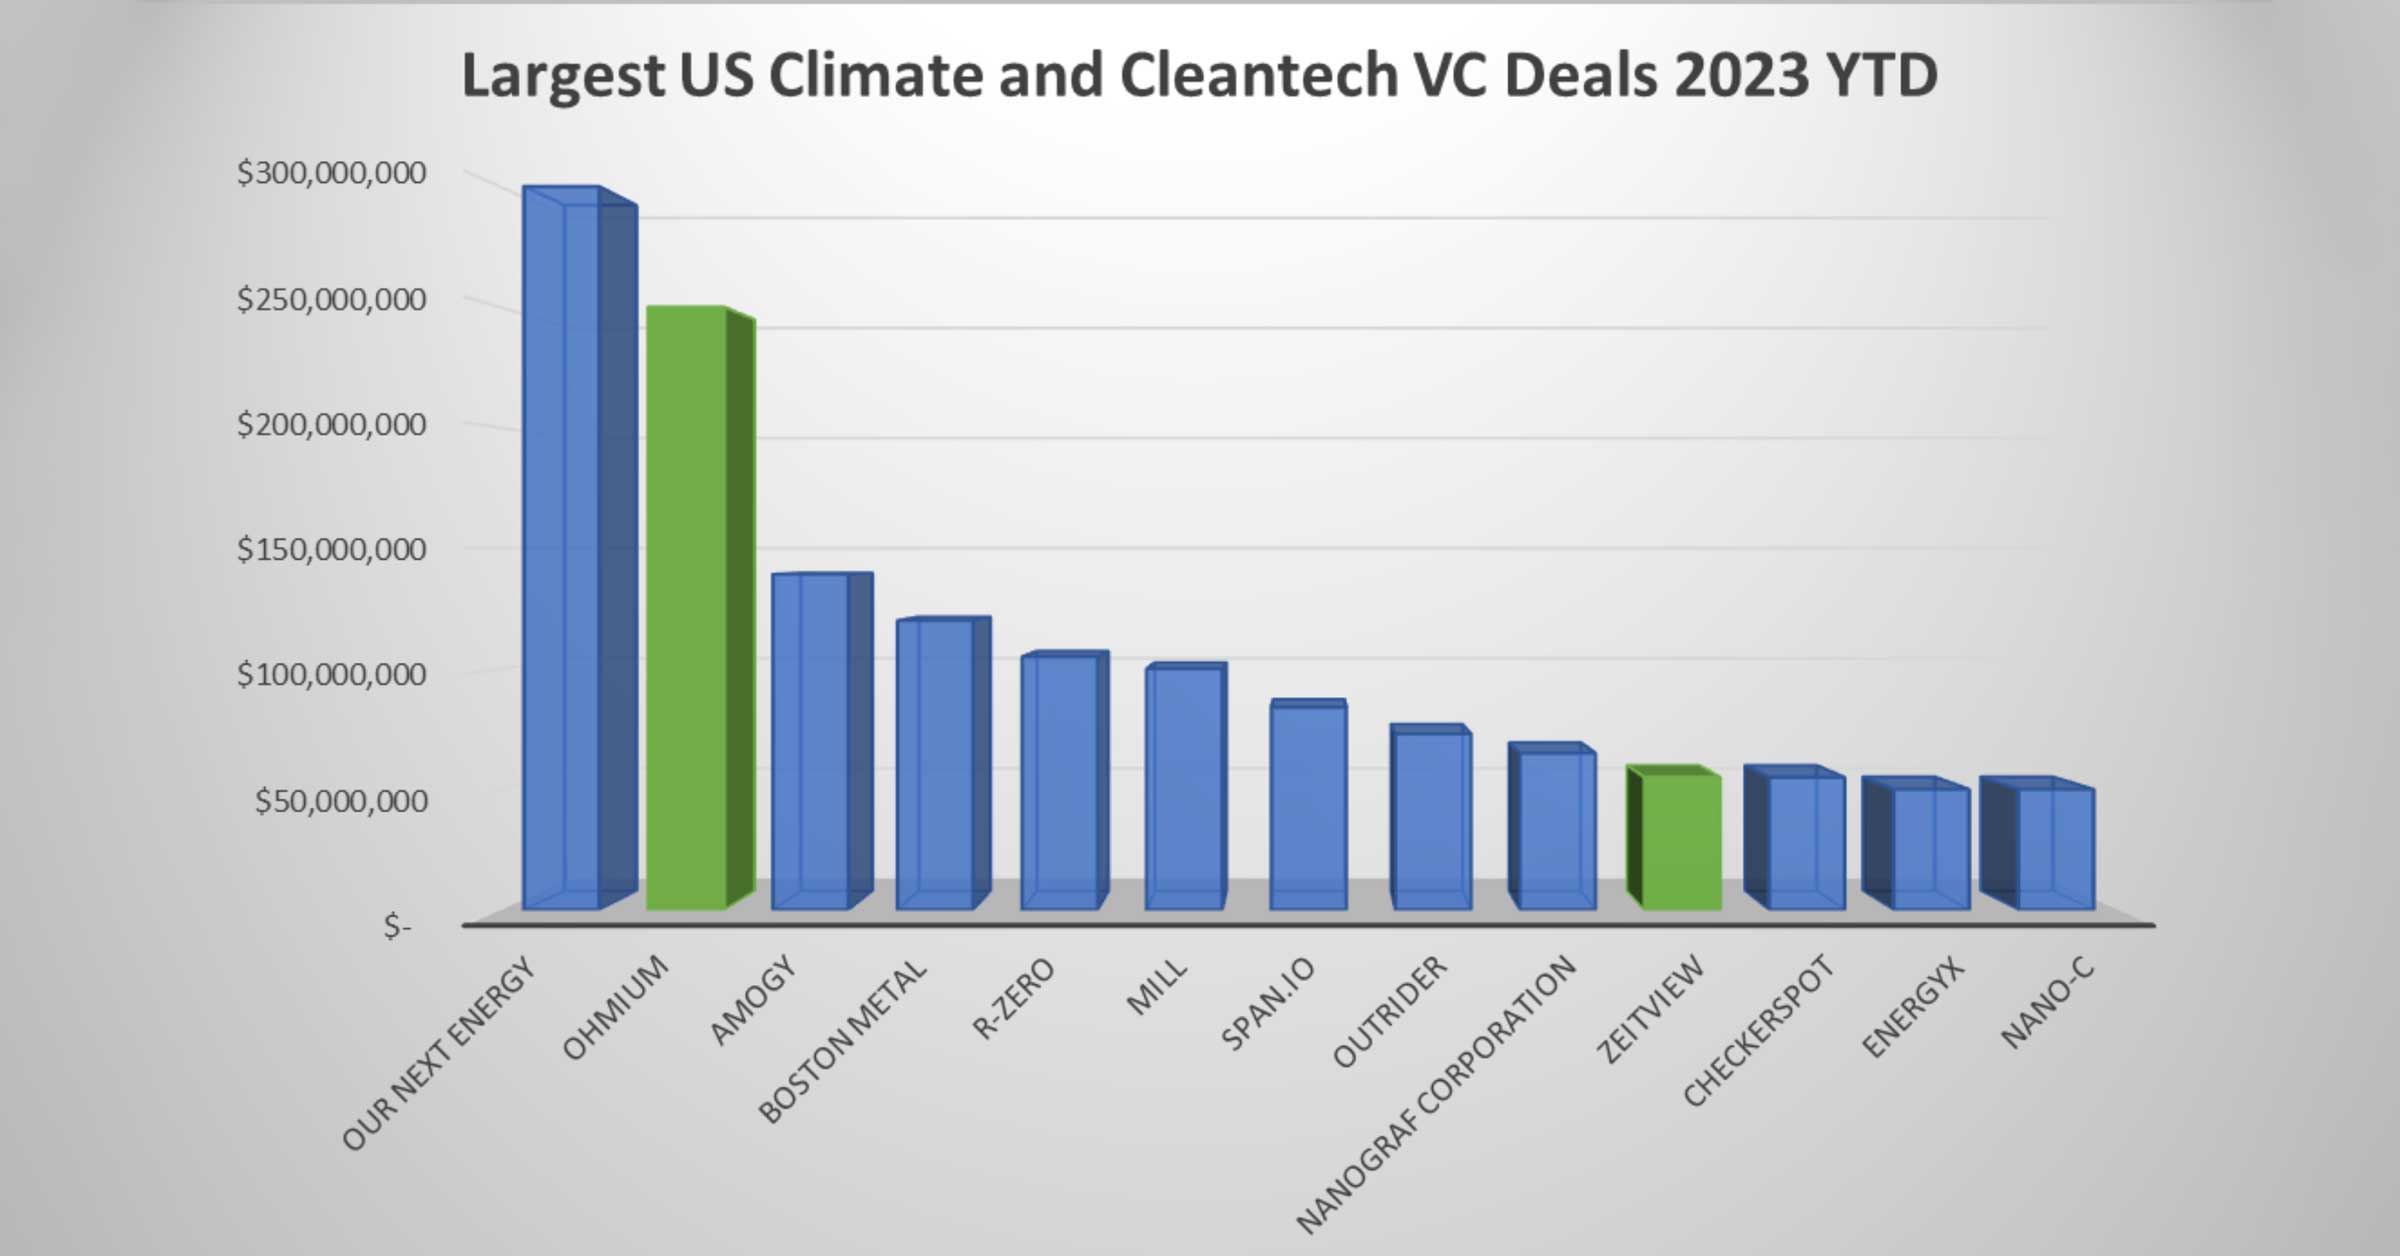 Largest US Climate and Cleantech VC Deals 2023 YTD. Bar graph starts at $300 and ends at $50 million. Our next energy source leads the chart followed by Ohmium, Amogy, Boston Metal, R-Zero, Mill, Span.io, Nanograf Corporation, eitview, Checkerspot, Energyx, and Nano-C.